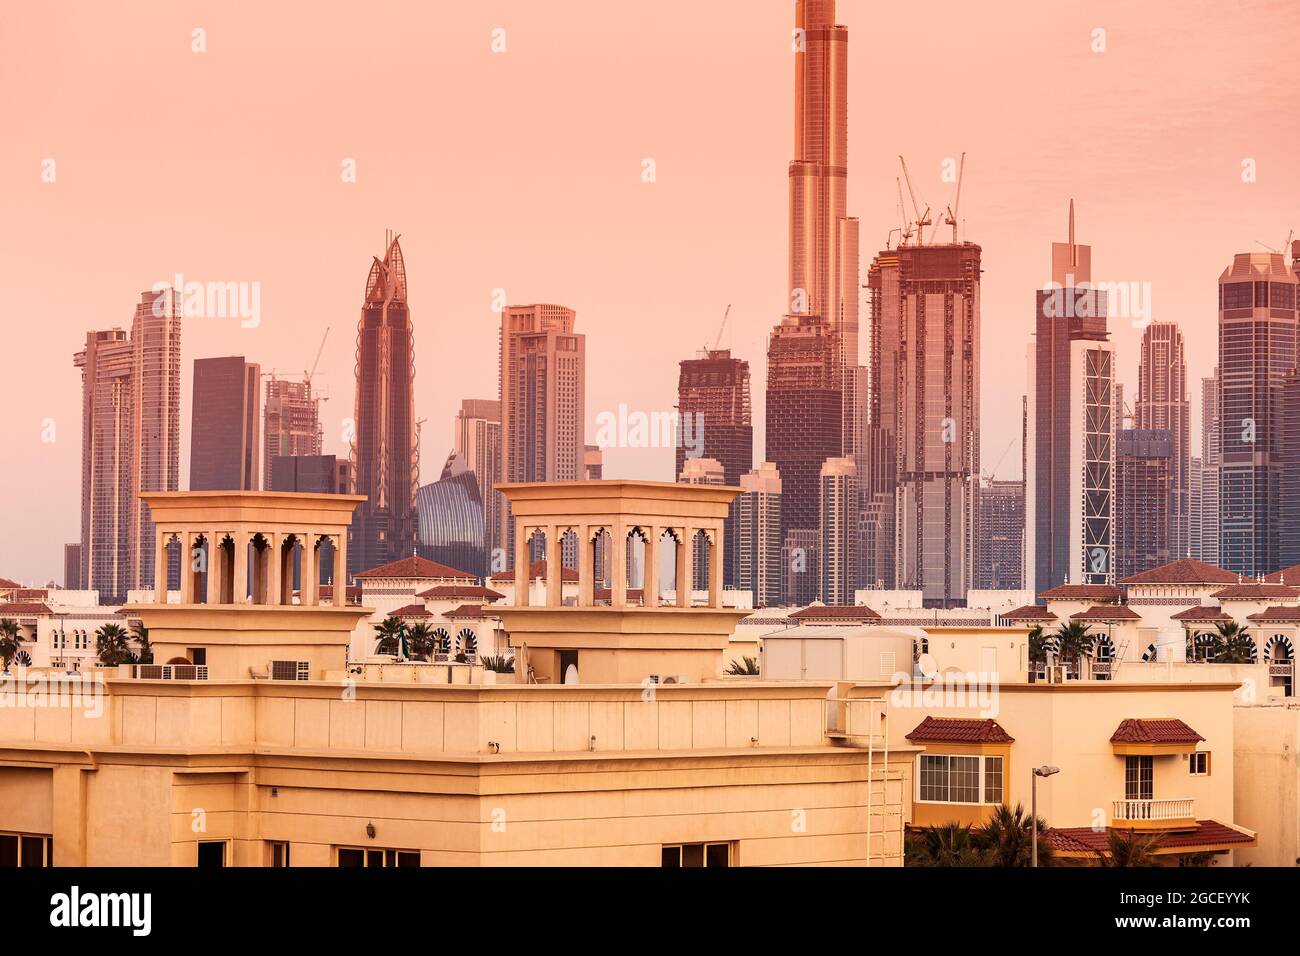 Suburb of Dubai with private residential buildings against the backdrop of a downtown metropolis with skyscrapers and hotels Stock Photo